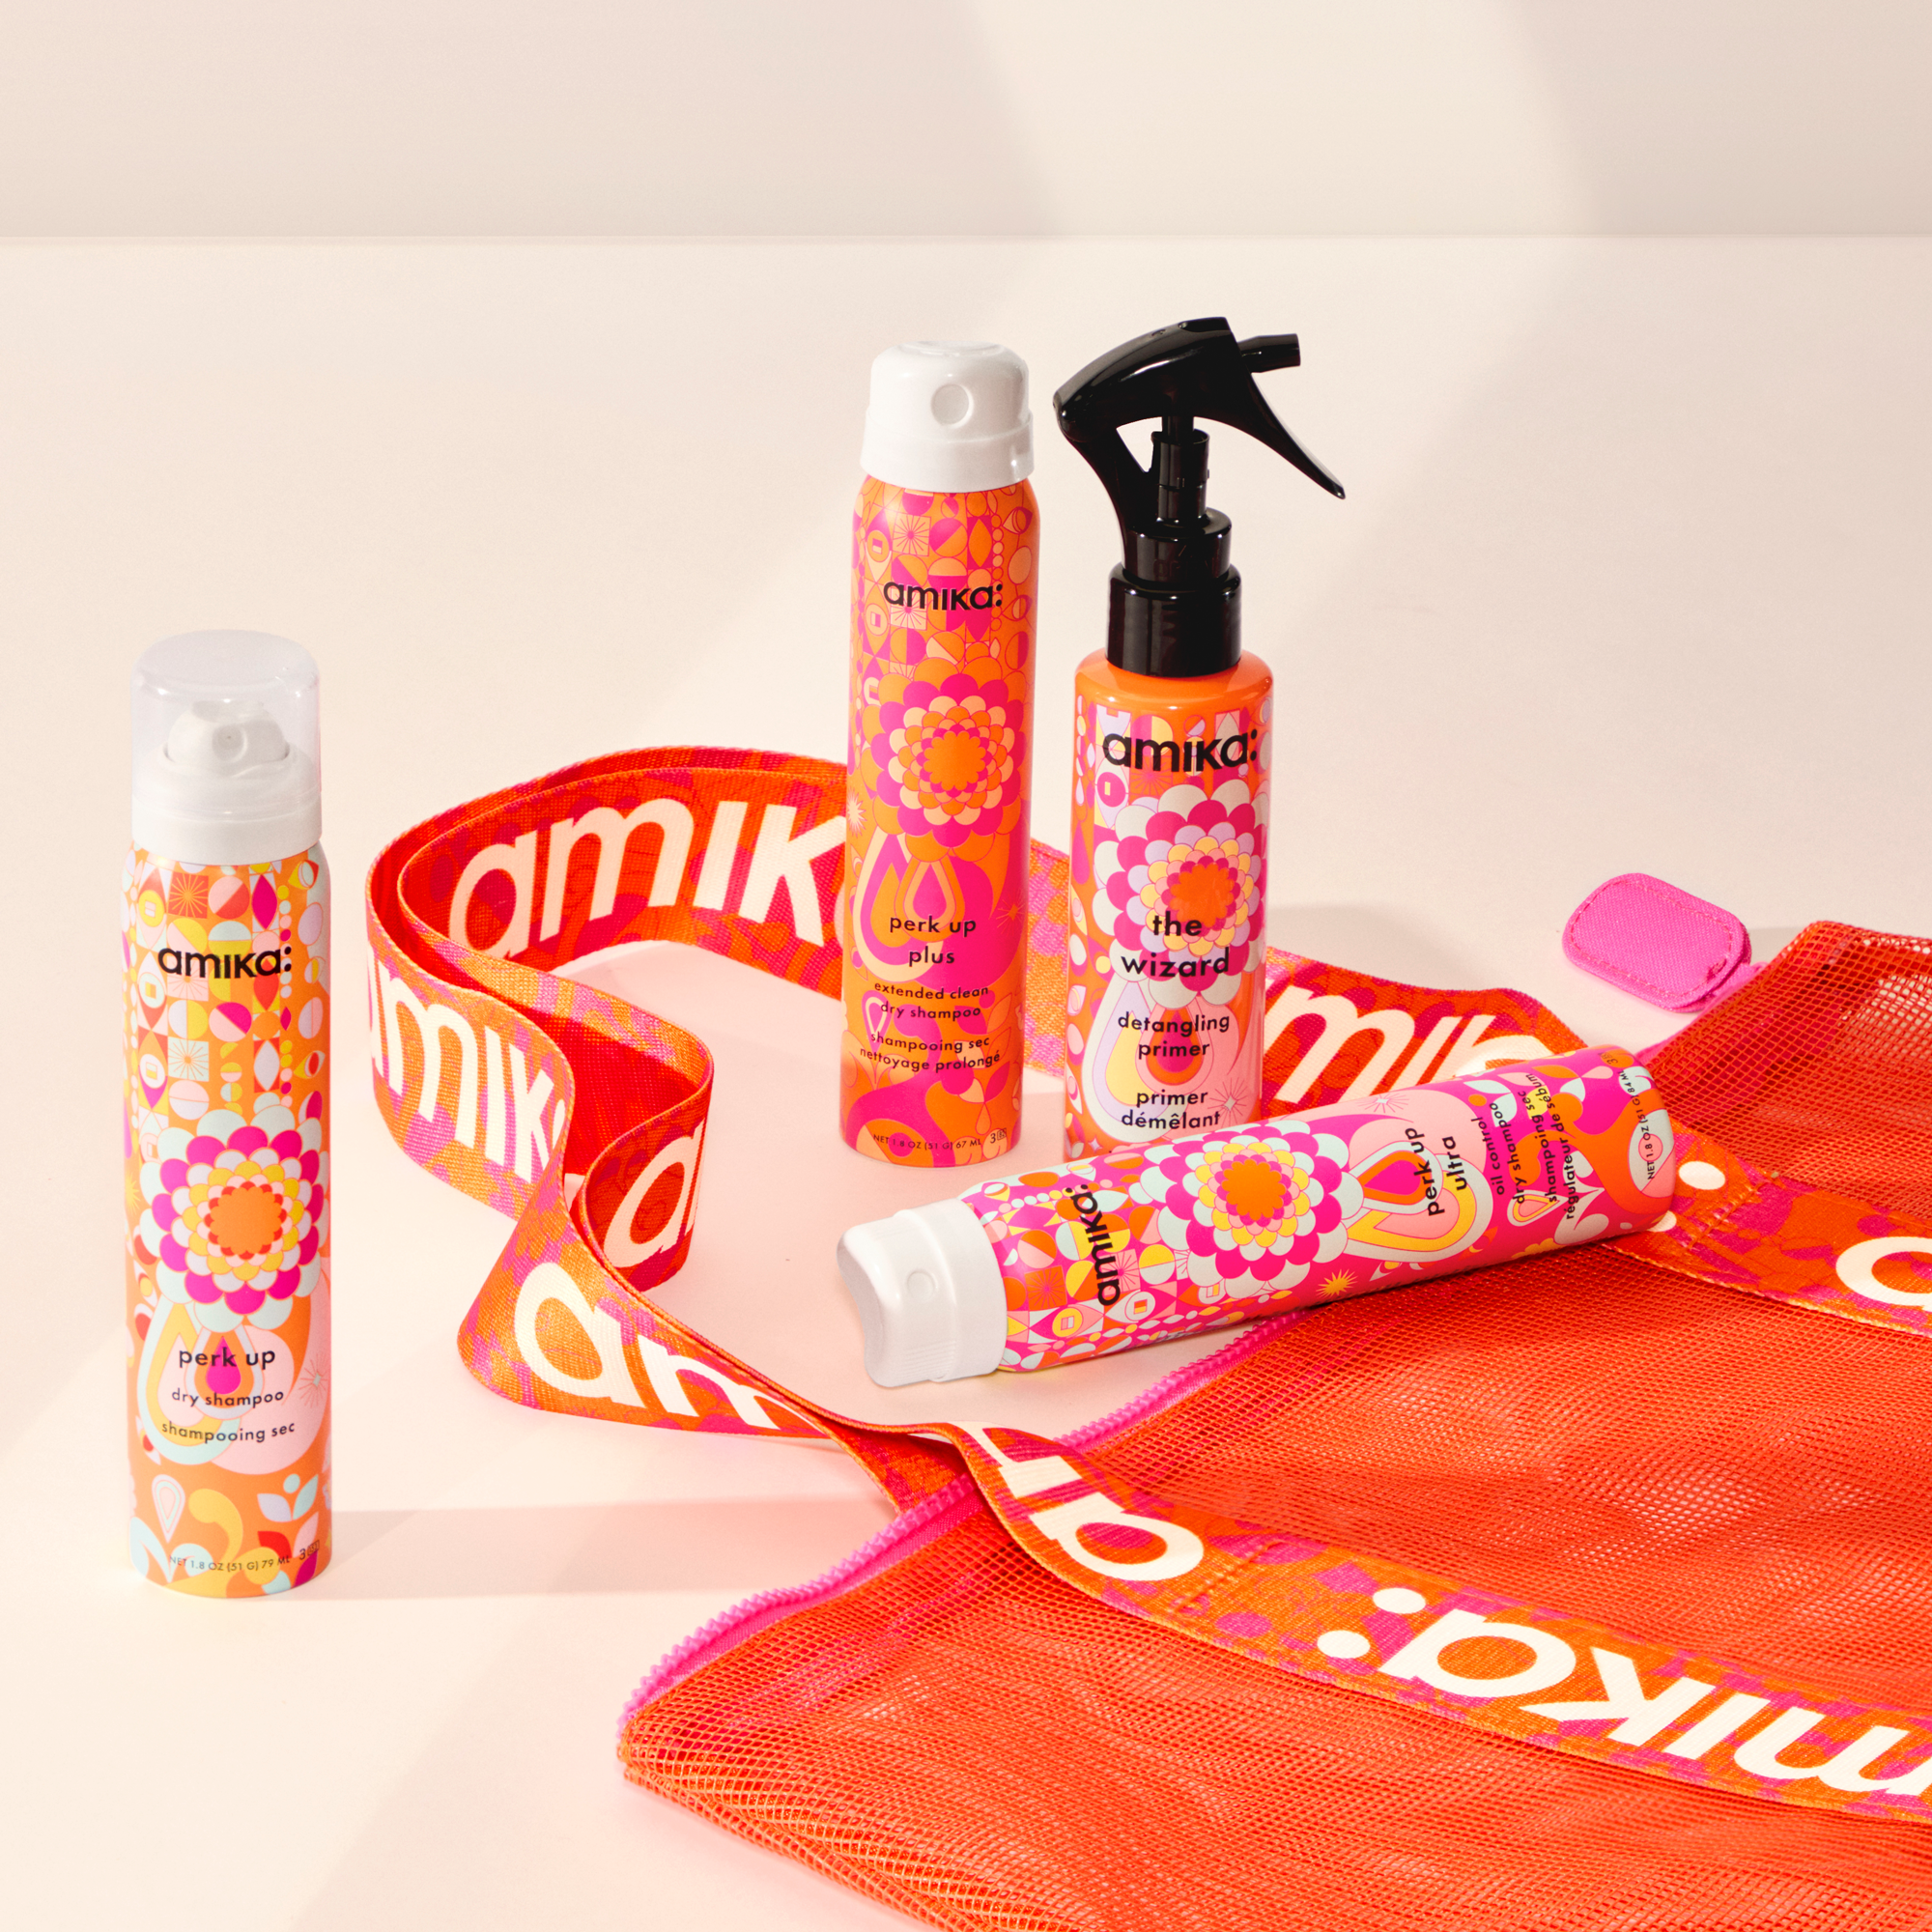 amika limited time gift with purchase: 3 travel sized dry shampoos: perk up, perk up ultra, and  perk up plus, along with a mesh beach tote bag with amika logo handles. additionally, VIP customers can add a 4 oz wizard detangling primer.